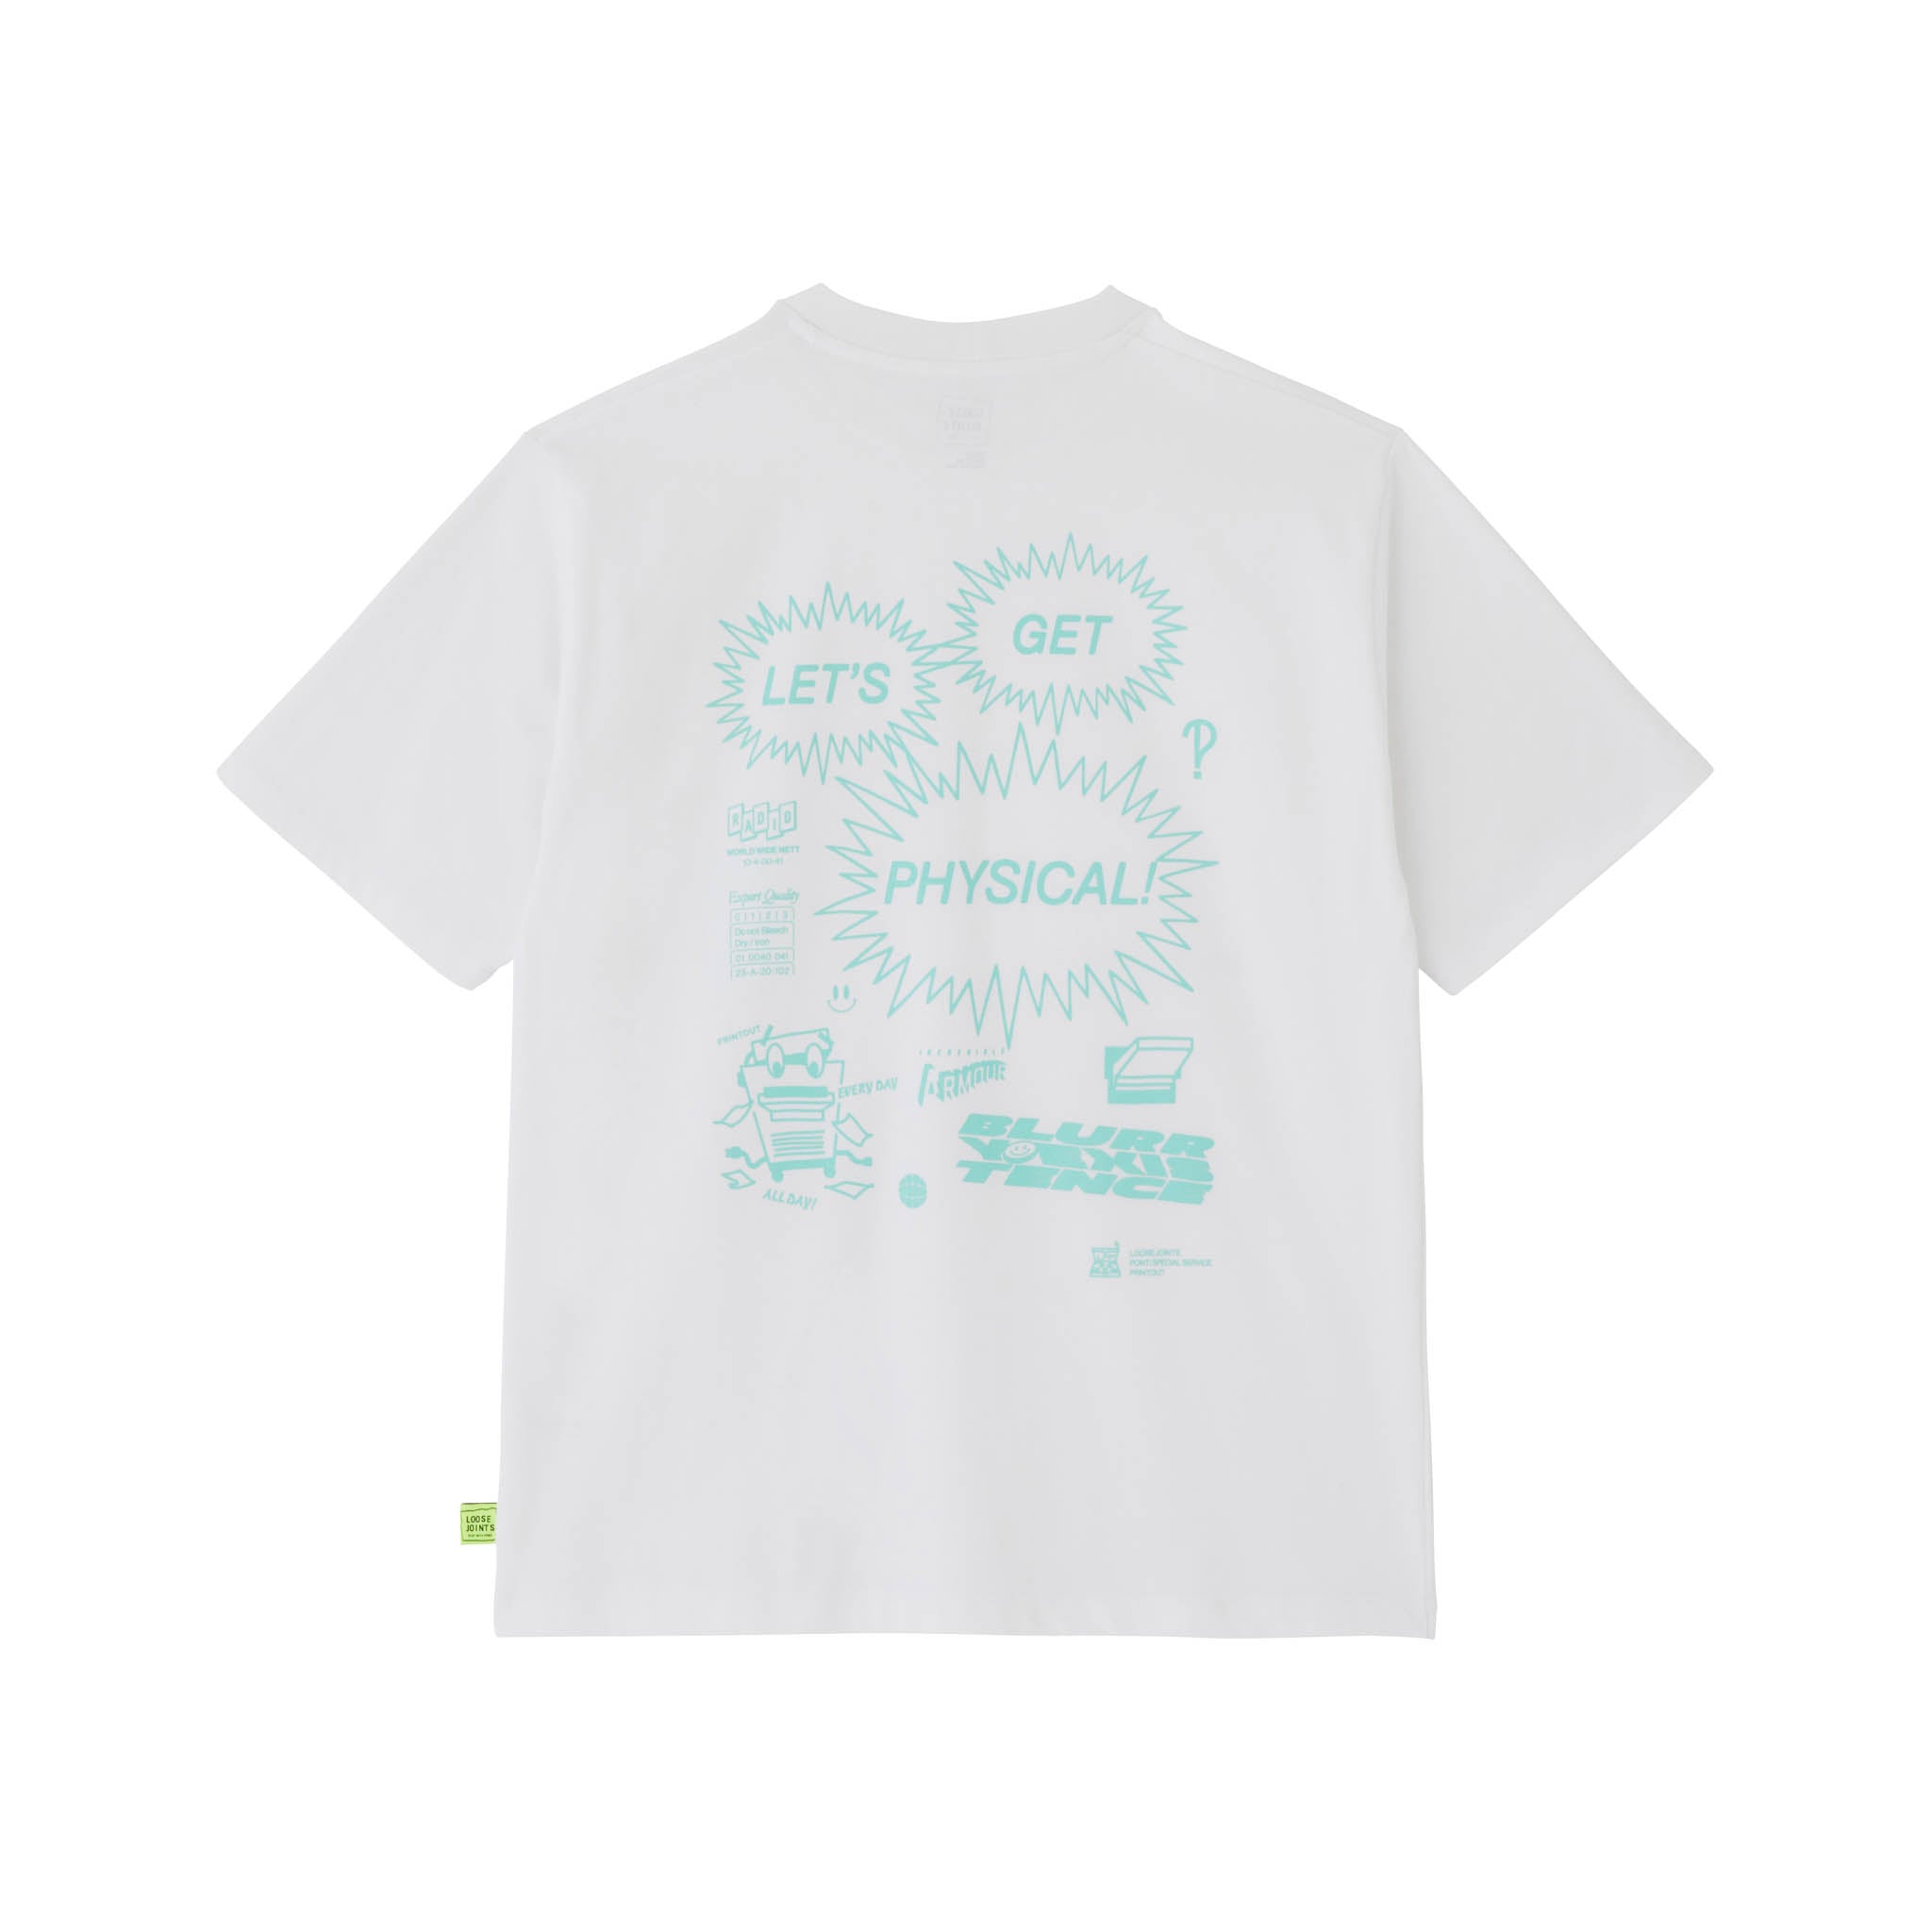 PRINTOUT X PONTI - 'LET'S GET PHYSICAL!' S/S TEE